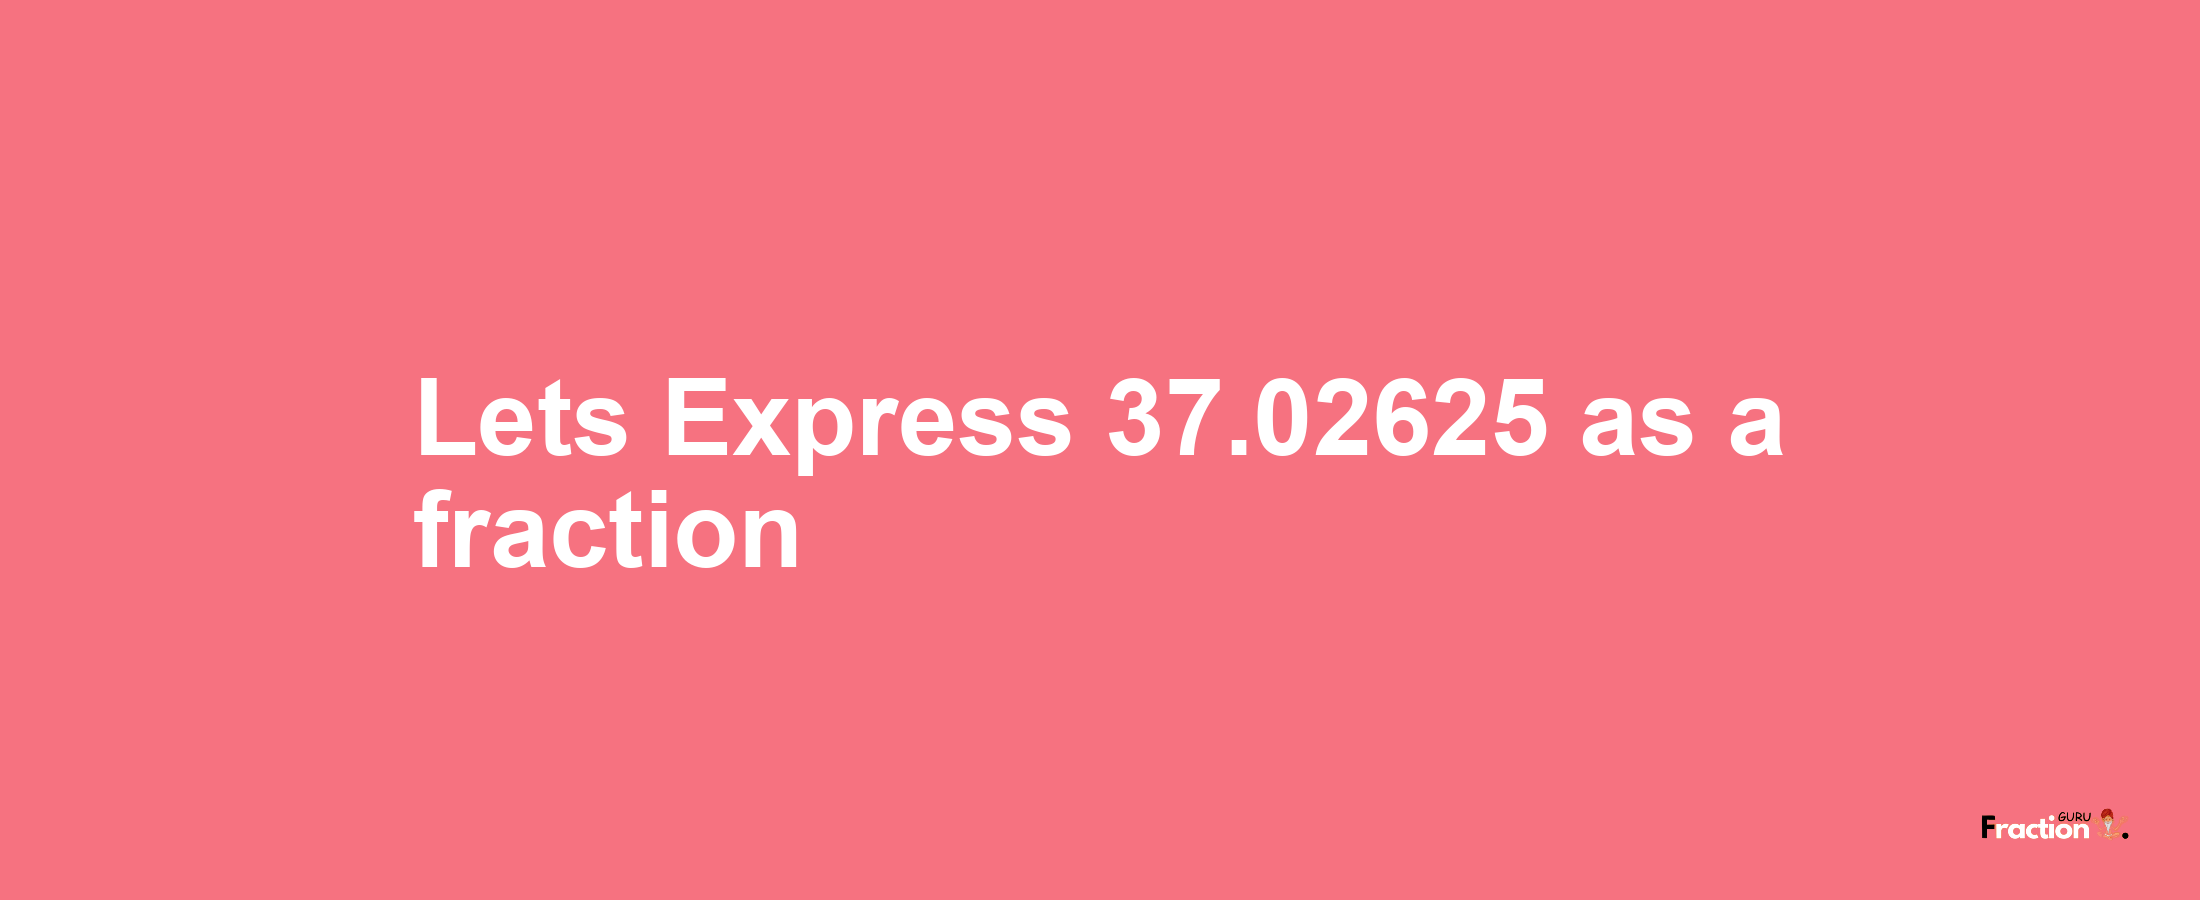 Lets Express 37.02625 as afraction